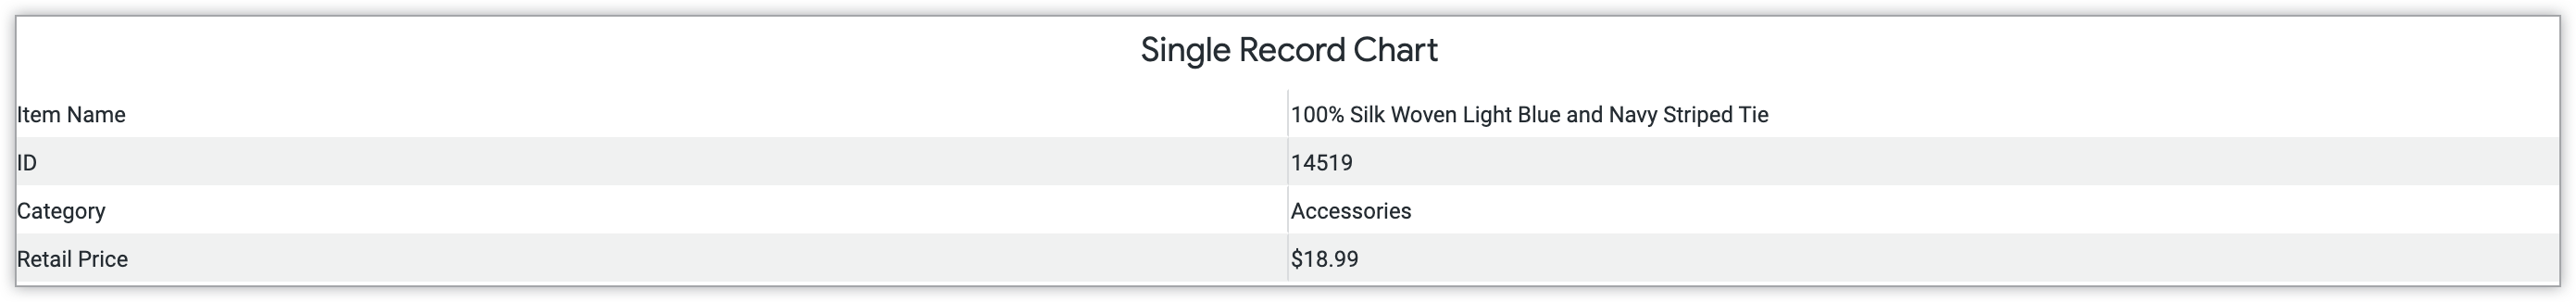 Single record chart showing the Product ID, Category, and Retail Price of the 